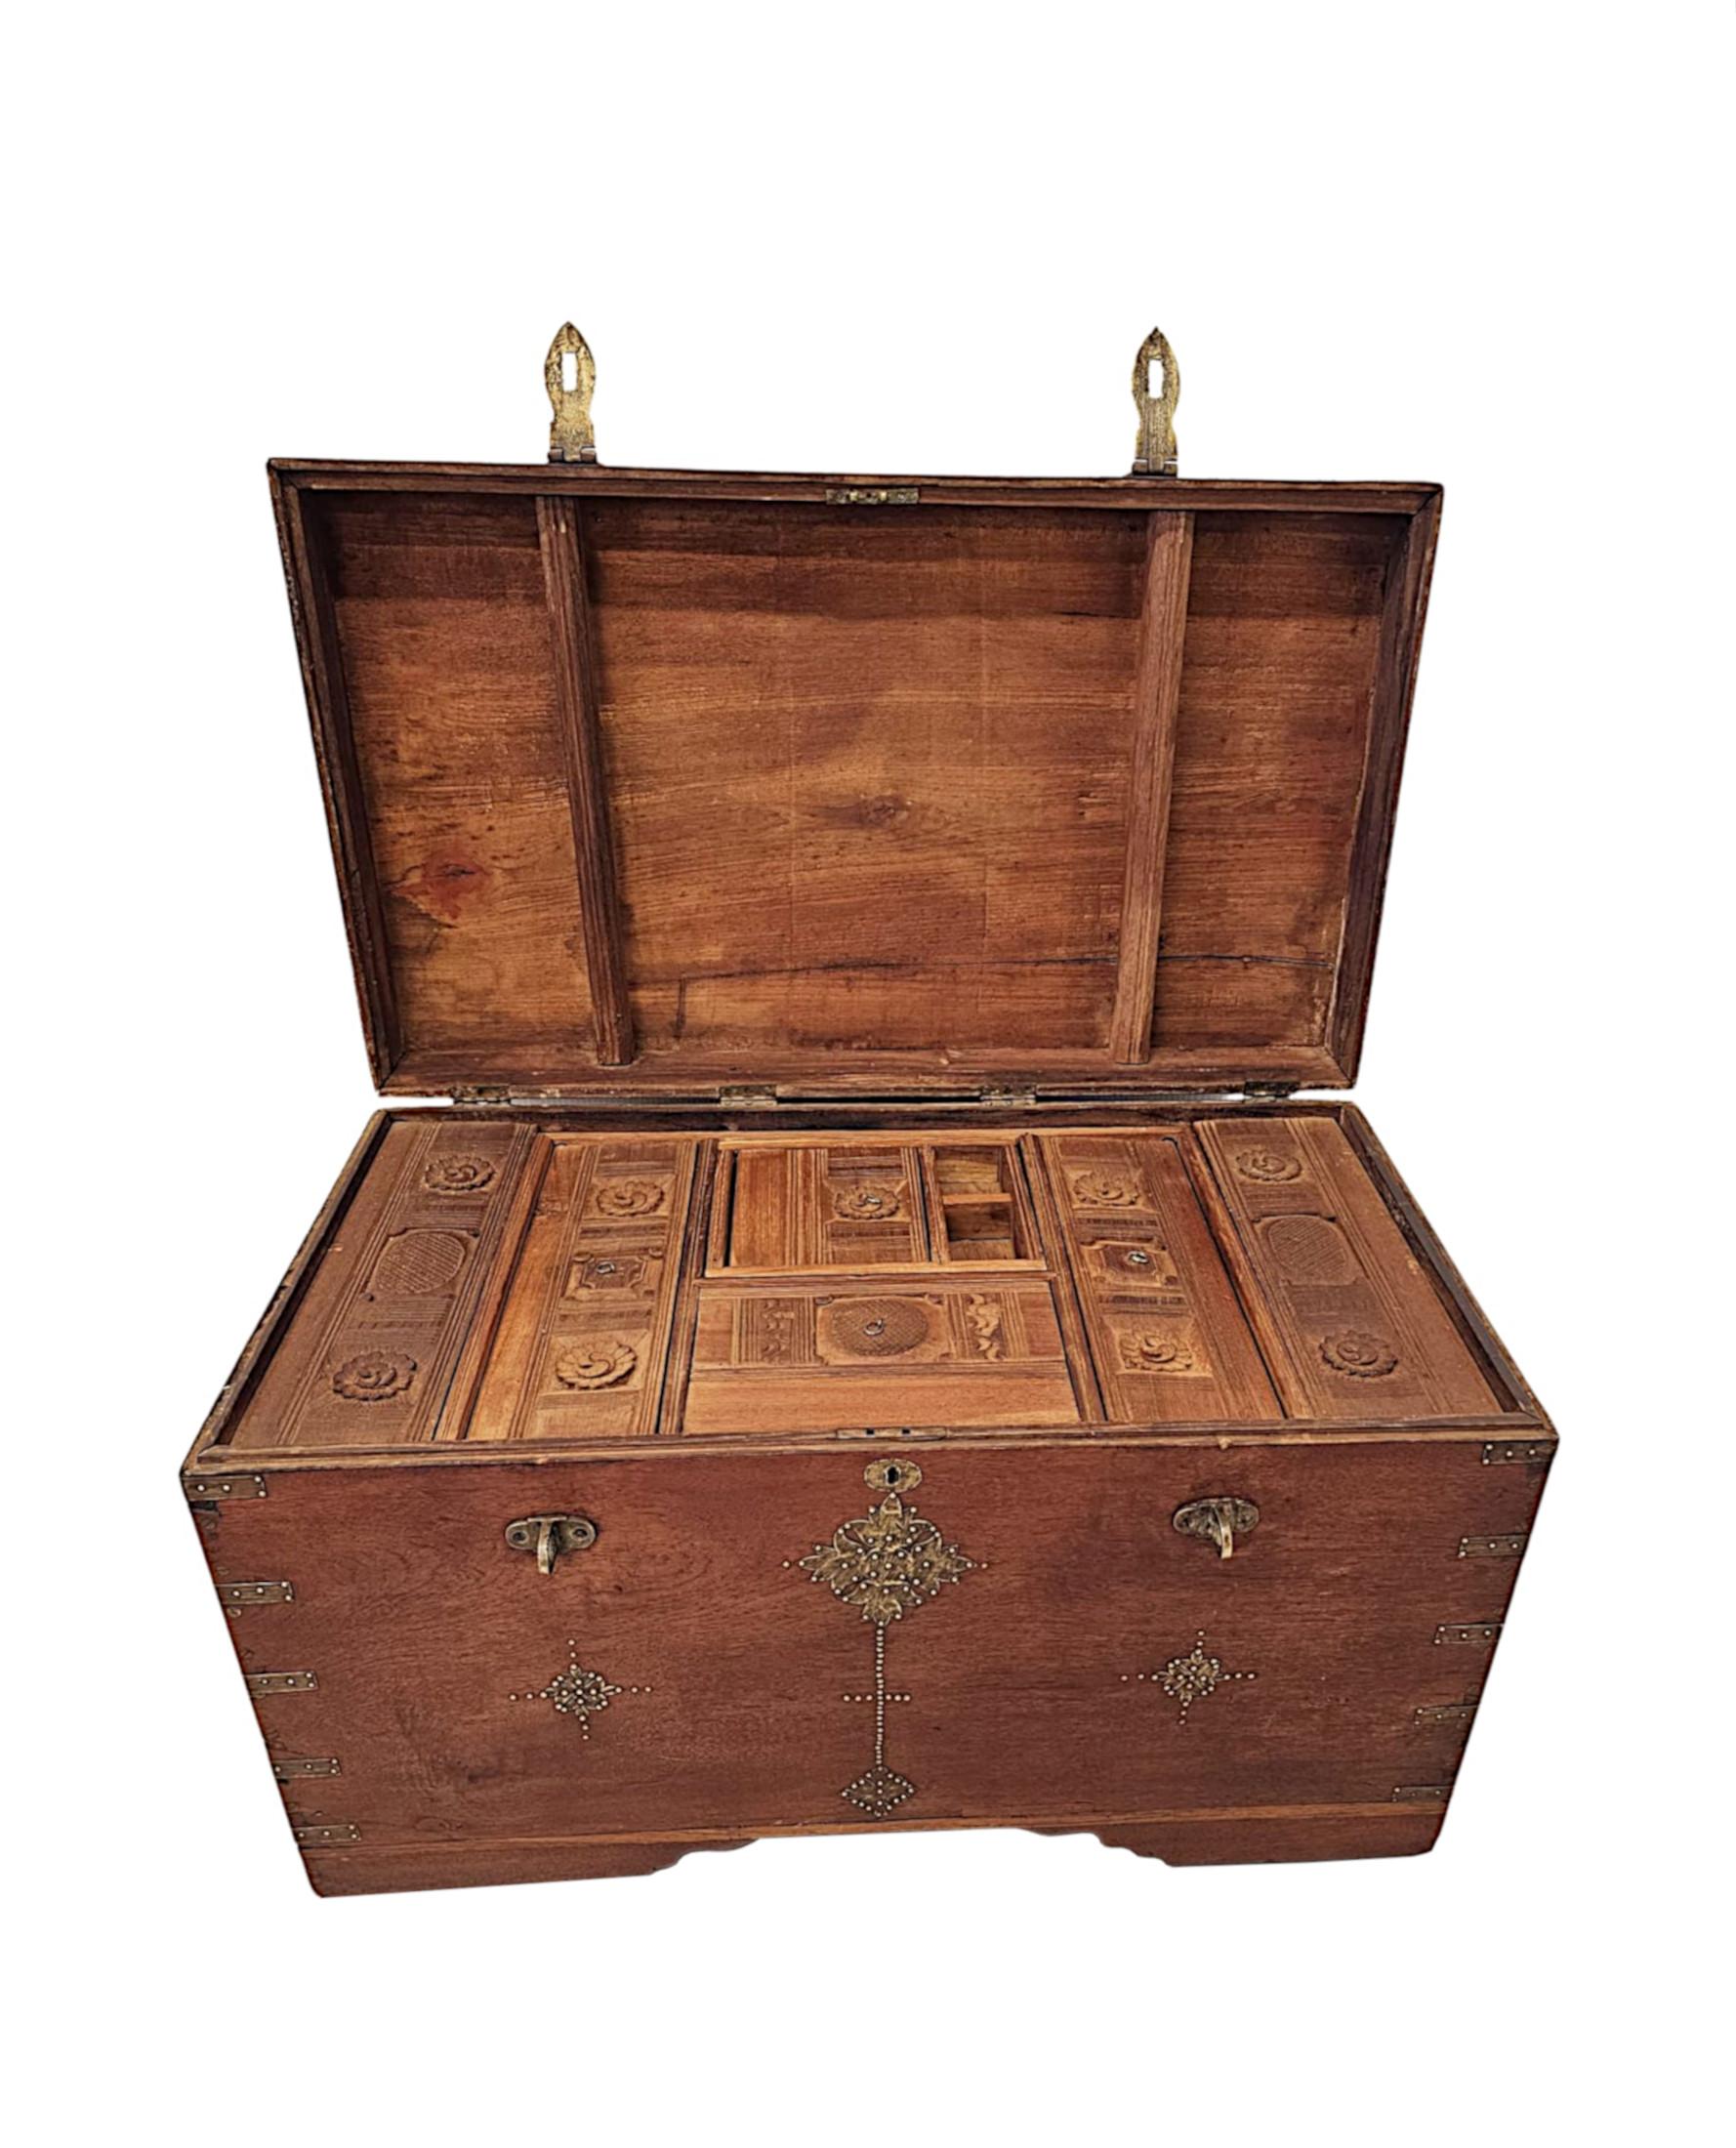  A Very Rare 19th Century Anglo Indian Travelling Trunk For Sale 1